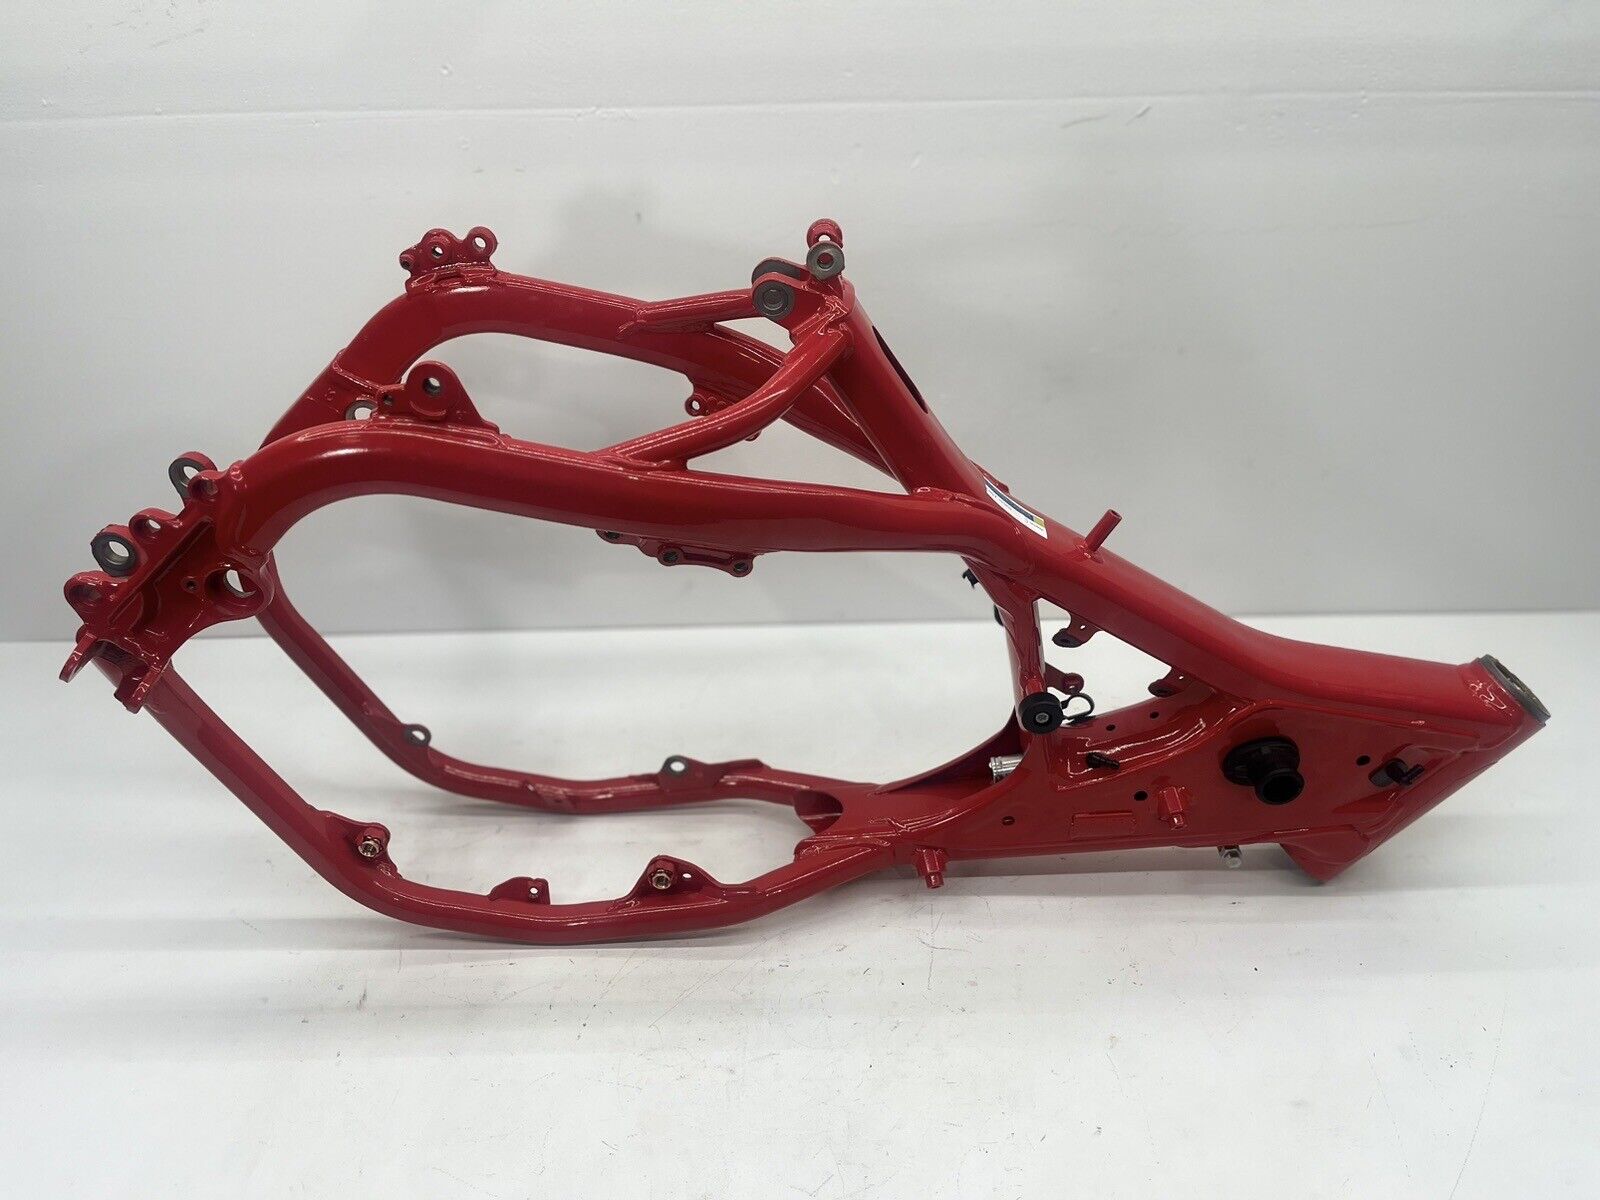 2023 Gasgas MC450 Frame OEM Main Fame Chassis Red Steel A54003201000FB MC 450F